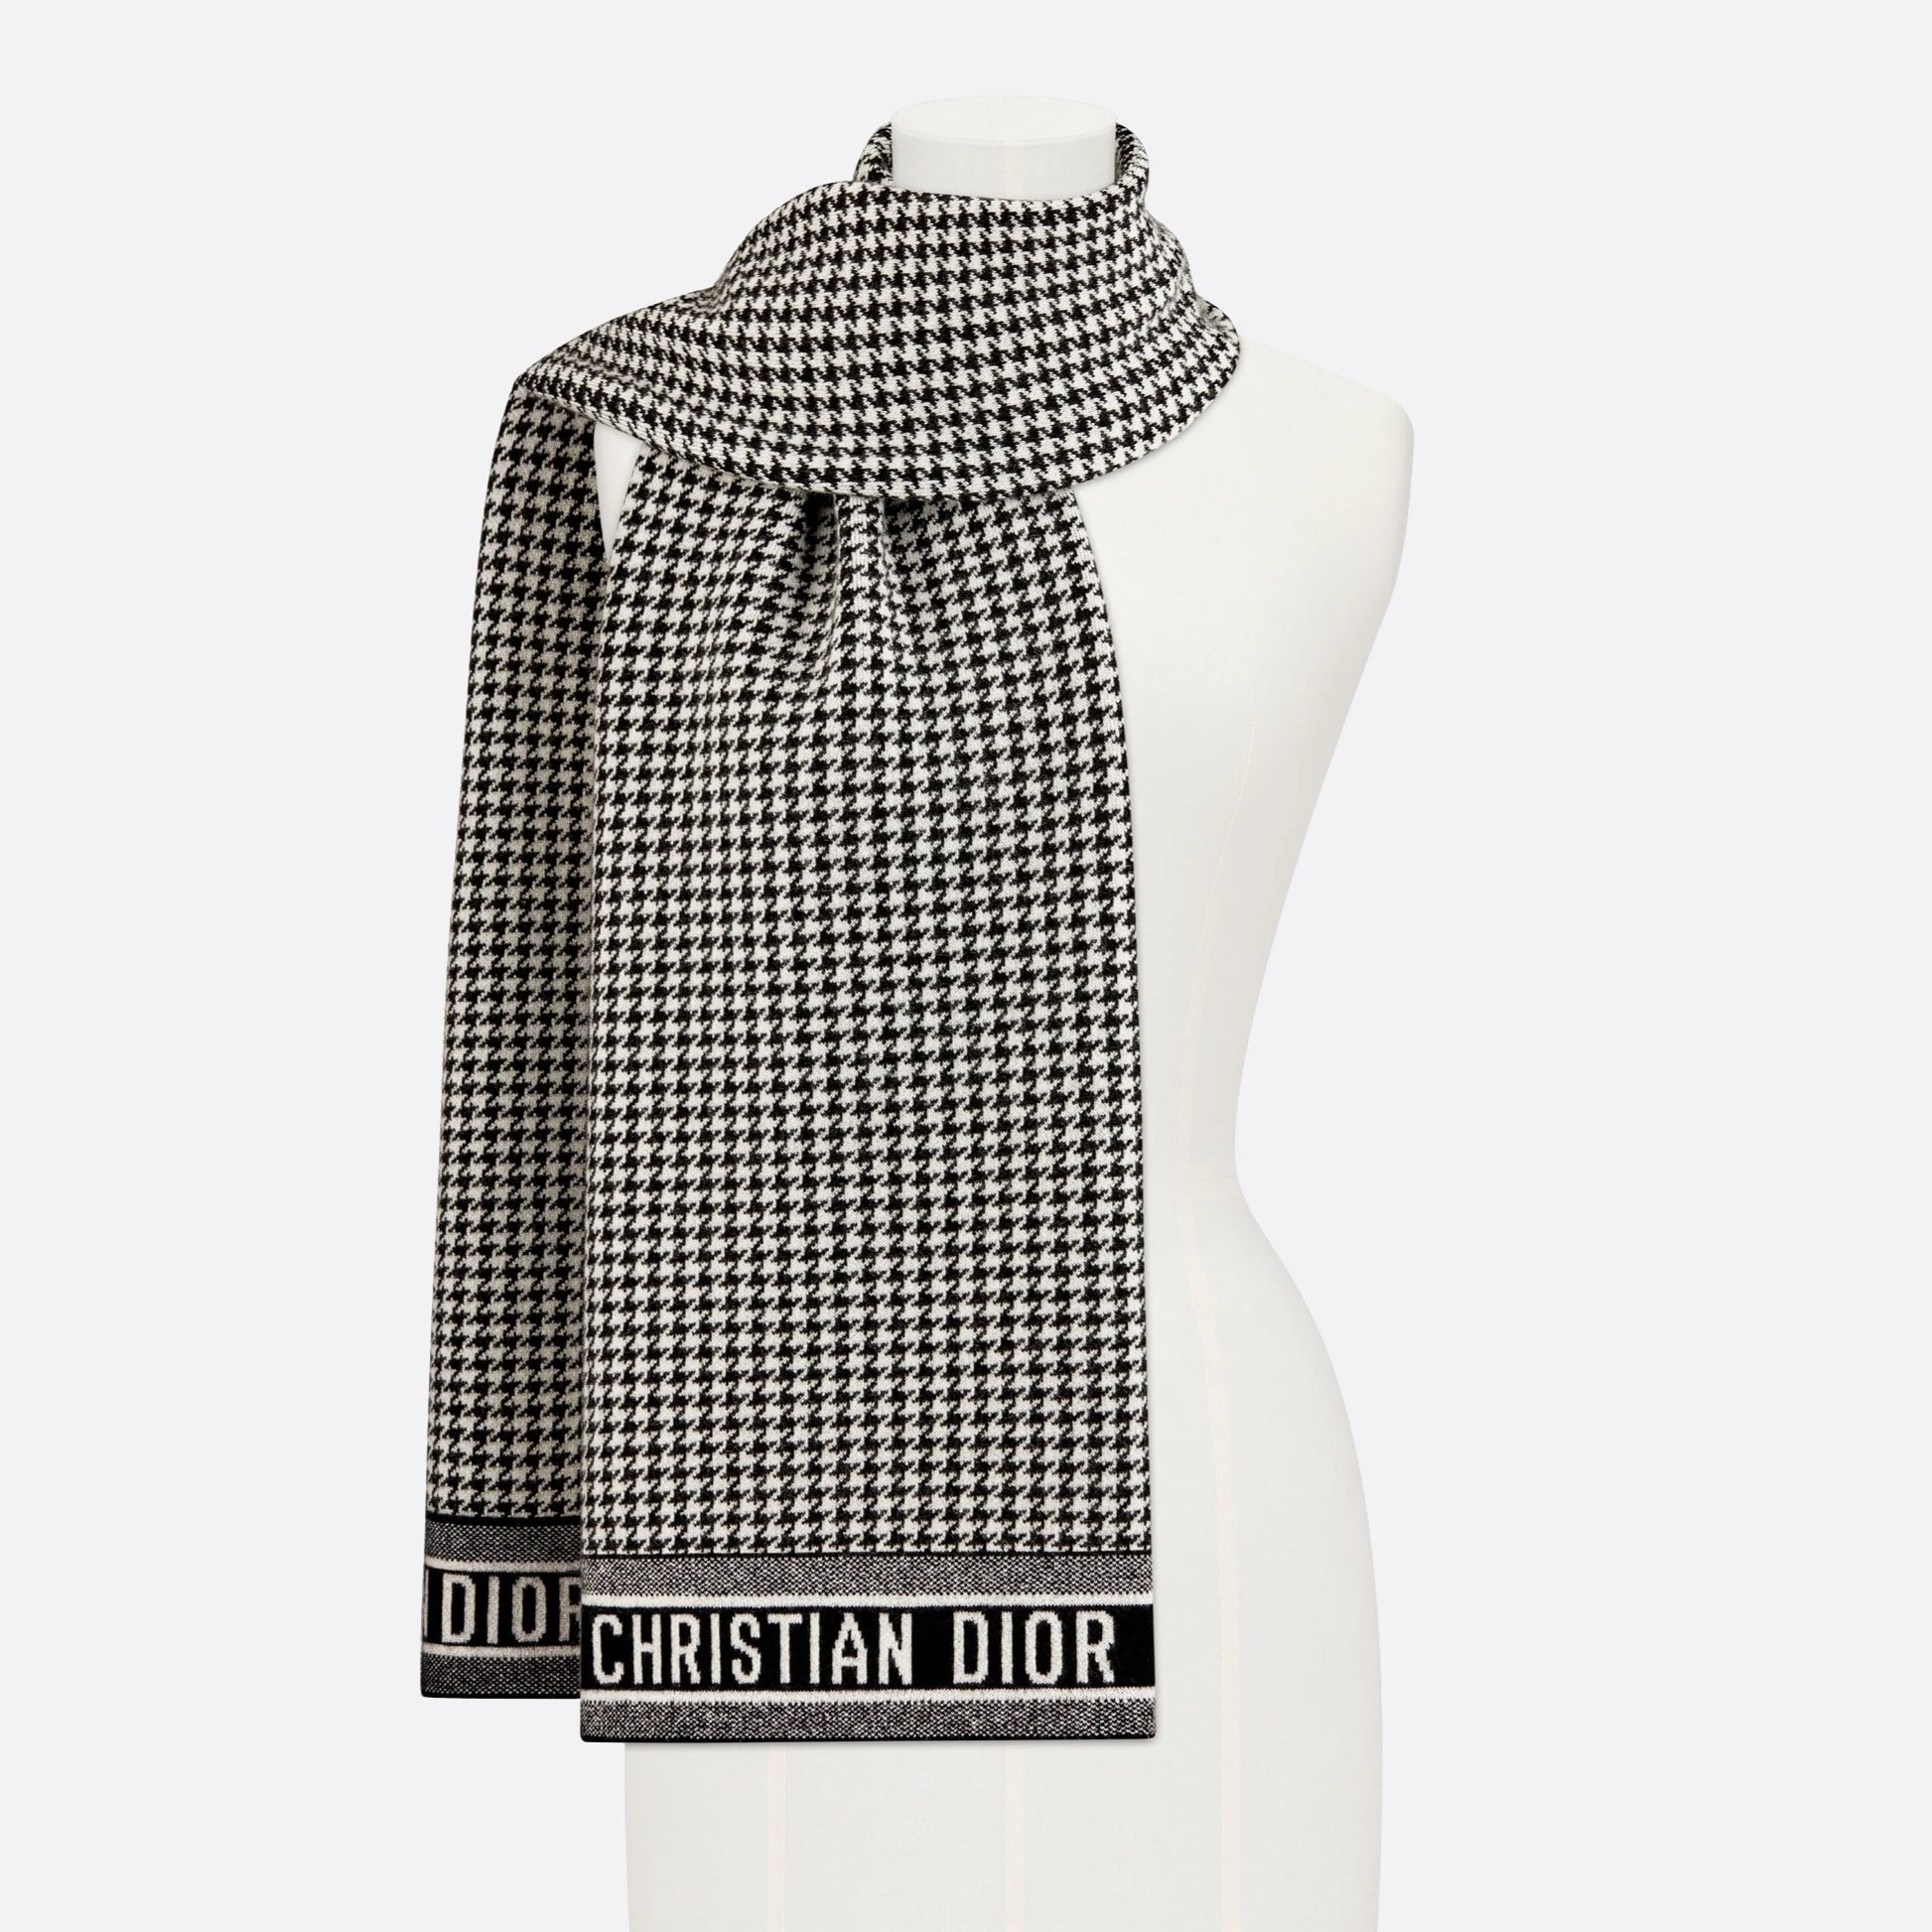 KHĂN DIOR 30 MONTAIGNE SCARF BLACK AND WHITE BLENDED CASHMERE KNIT 2